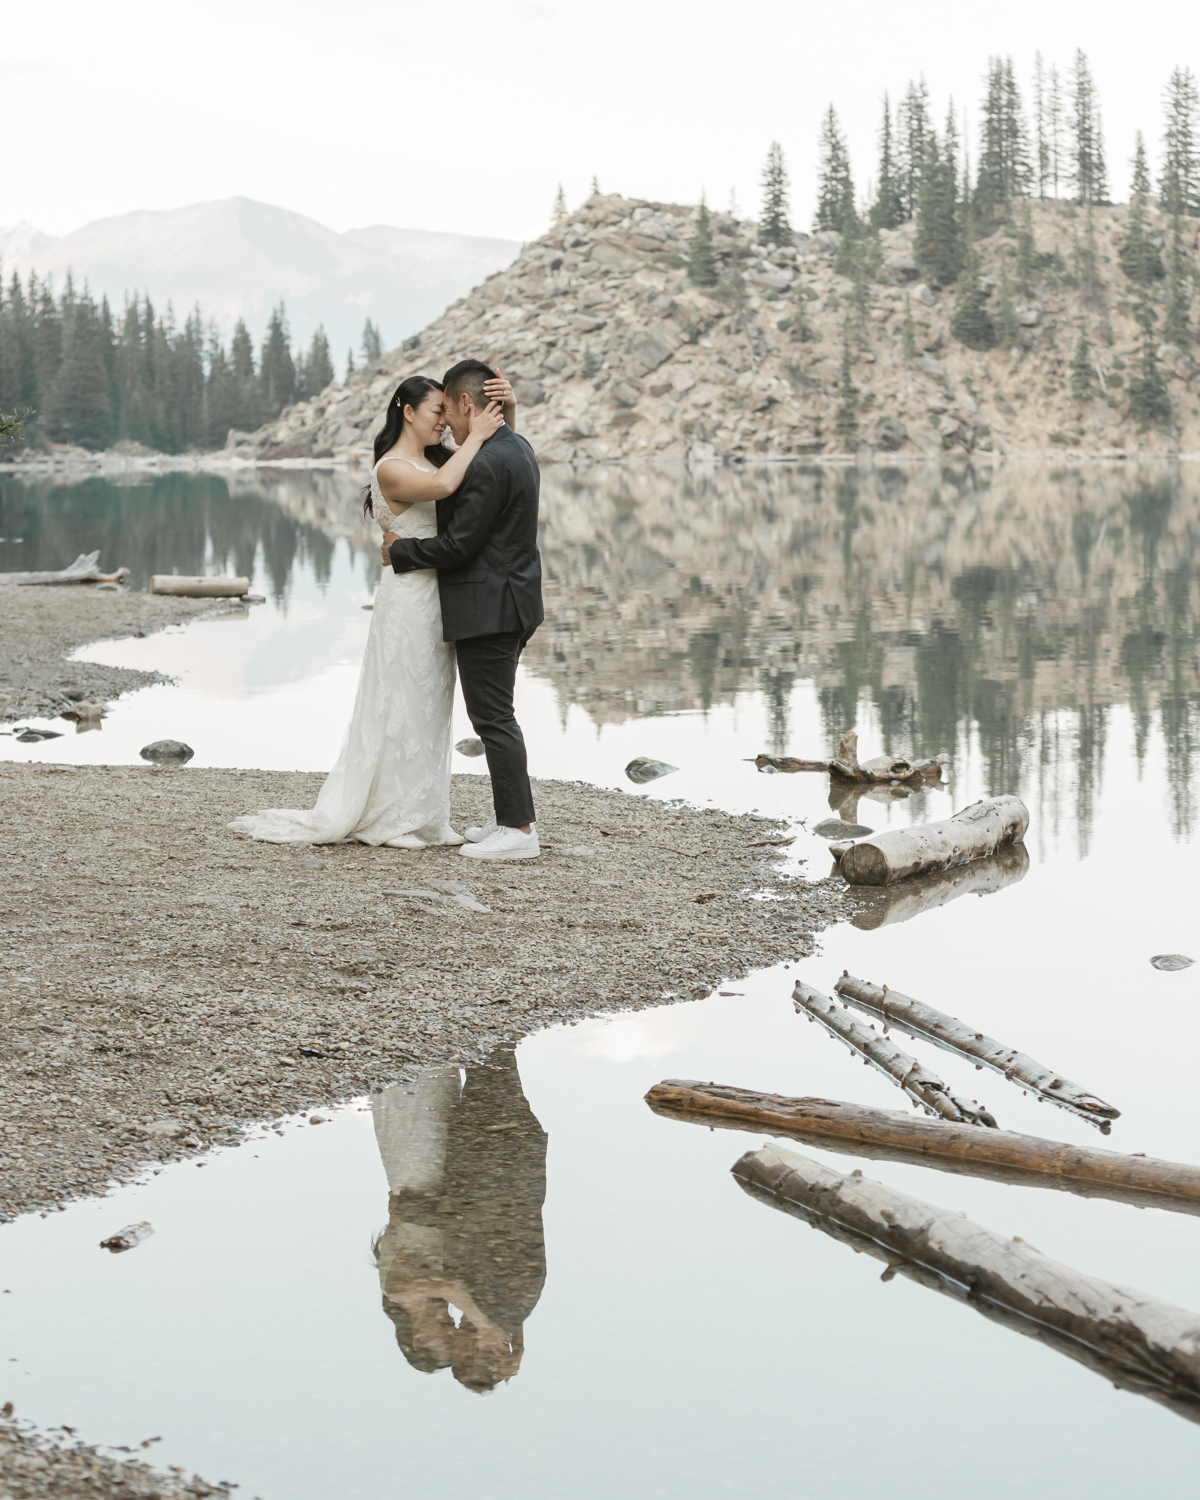 Elopement in Banff National Park couples portraits at sunset